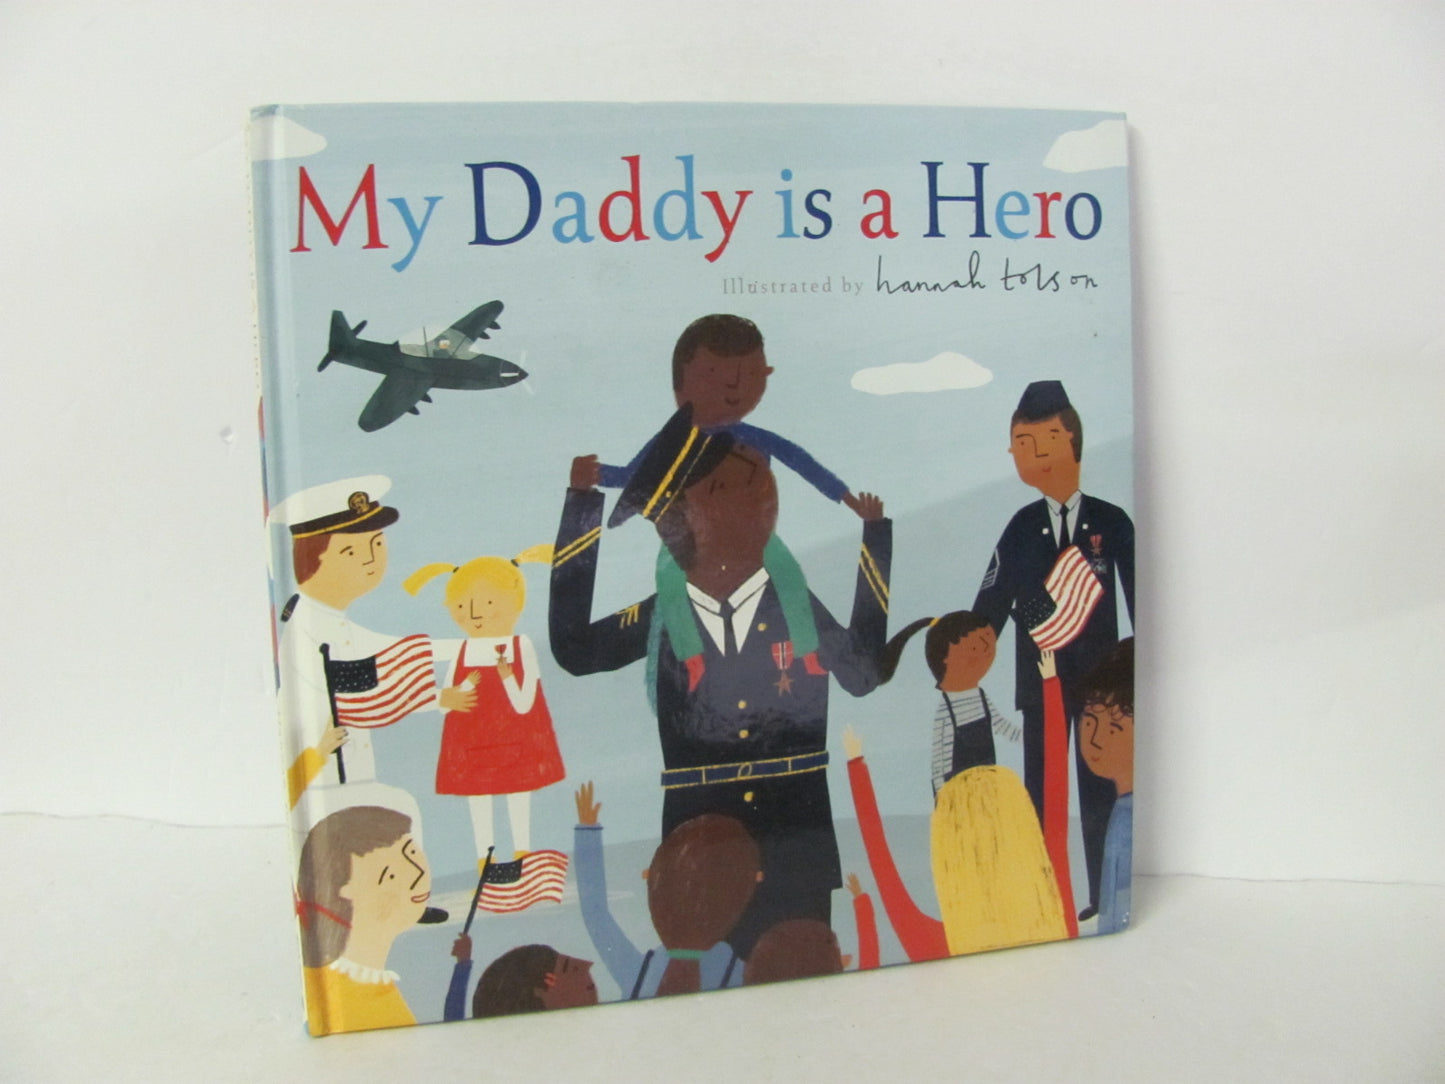 My Daddy is a Hero Kane Miller Used Tolson Children's Books